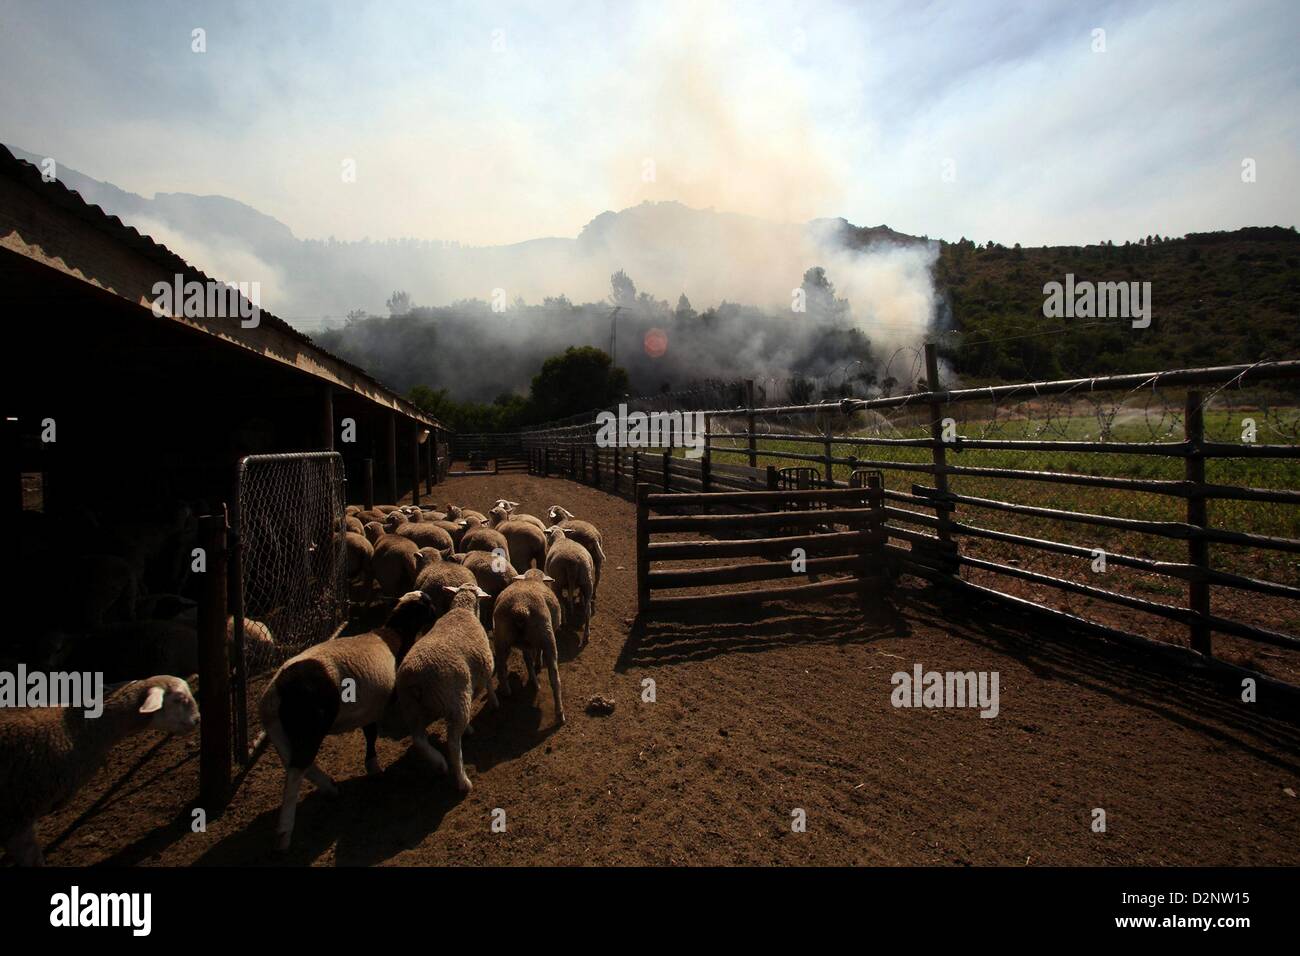 Paarl, South Africa. 29th January 2013.  Sheep run at La'Arc De Orleans on January 29, 2013, in Paarl, South Africa. No firemen were present as the veld fire swept through the entire Boland region in the Western Cape. (Photo by Gallo Images / The Times / Shelley Christians/ Alamy Live News) Stock Photo